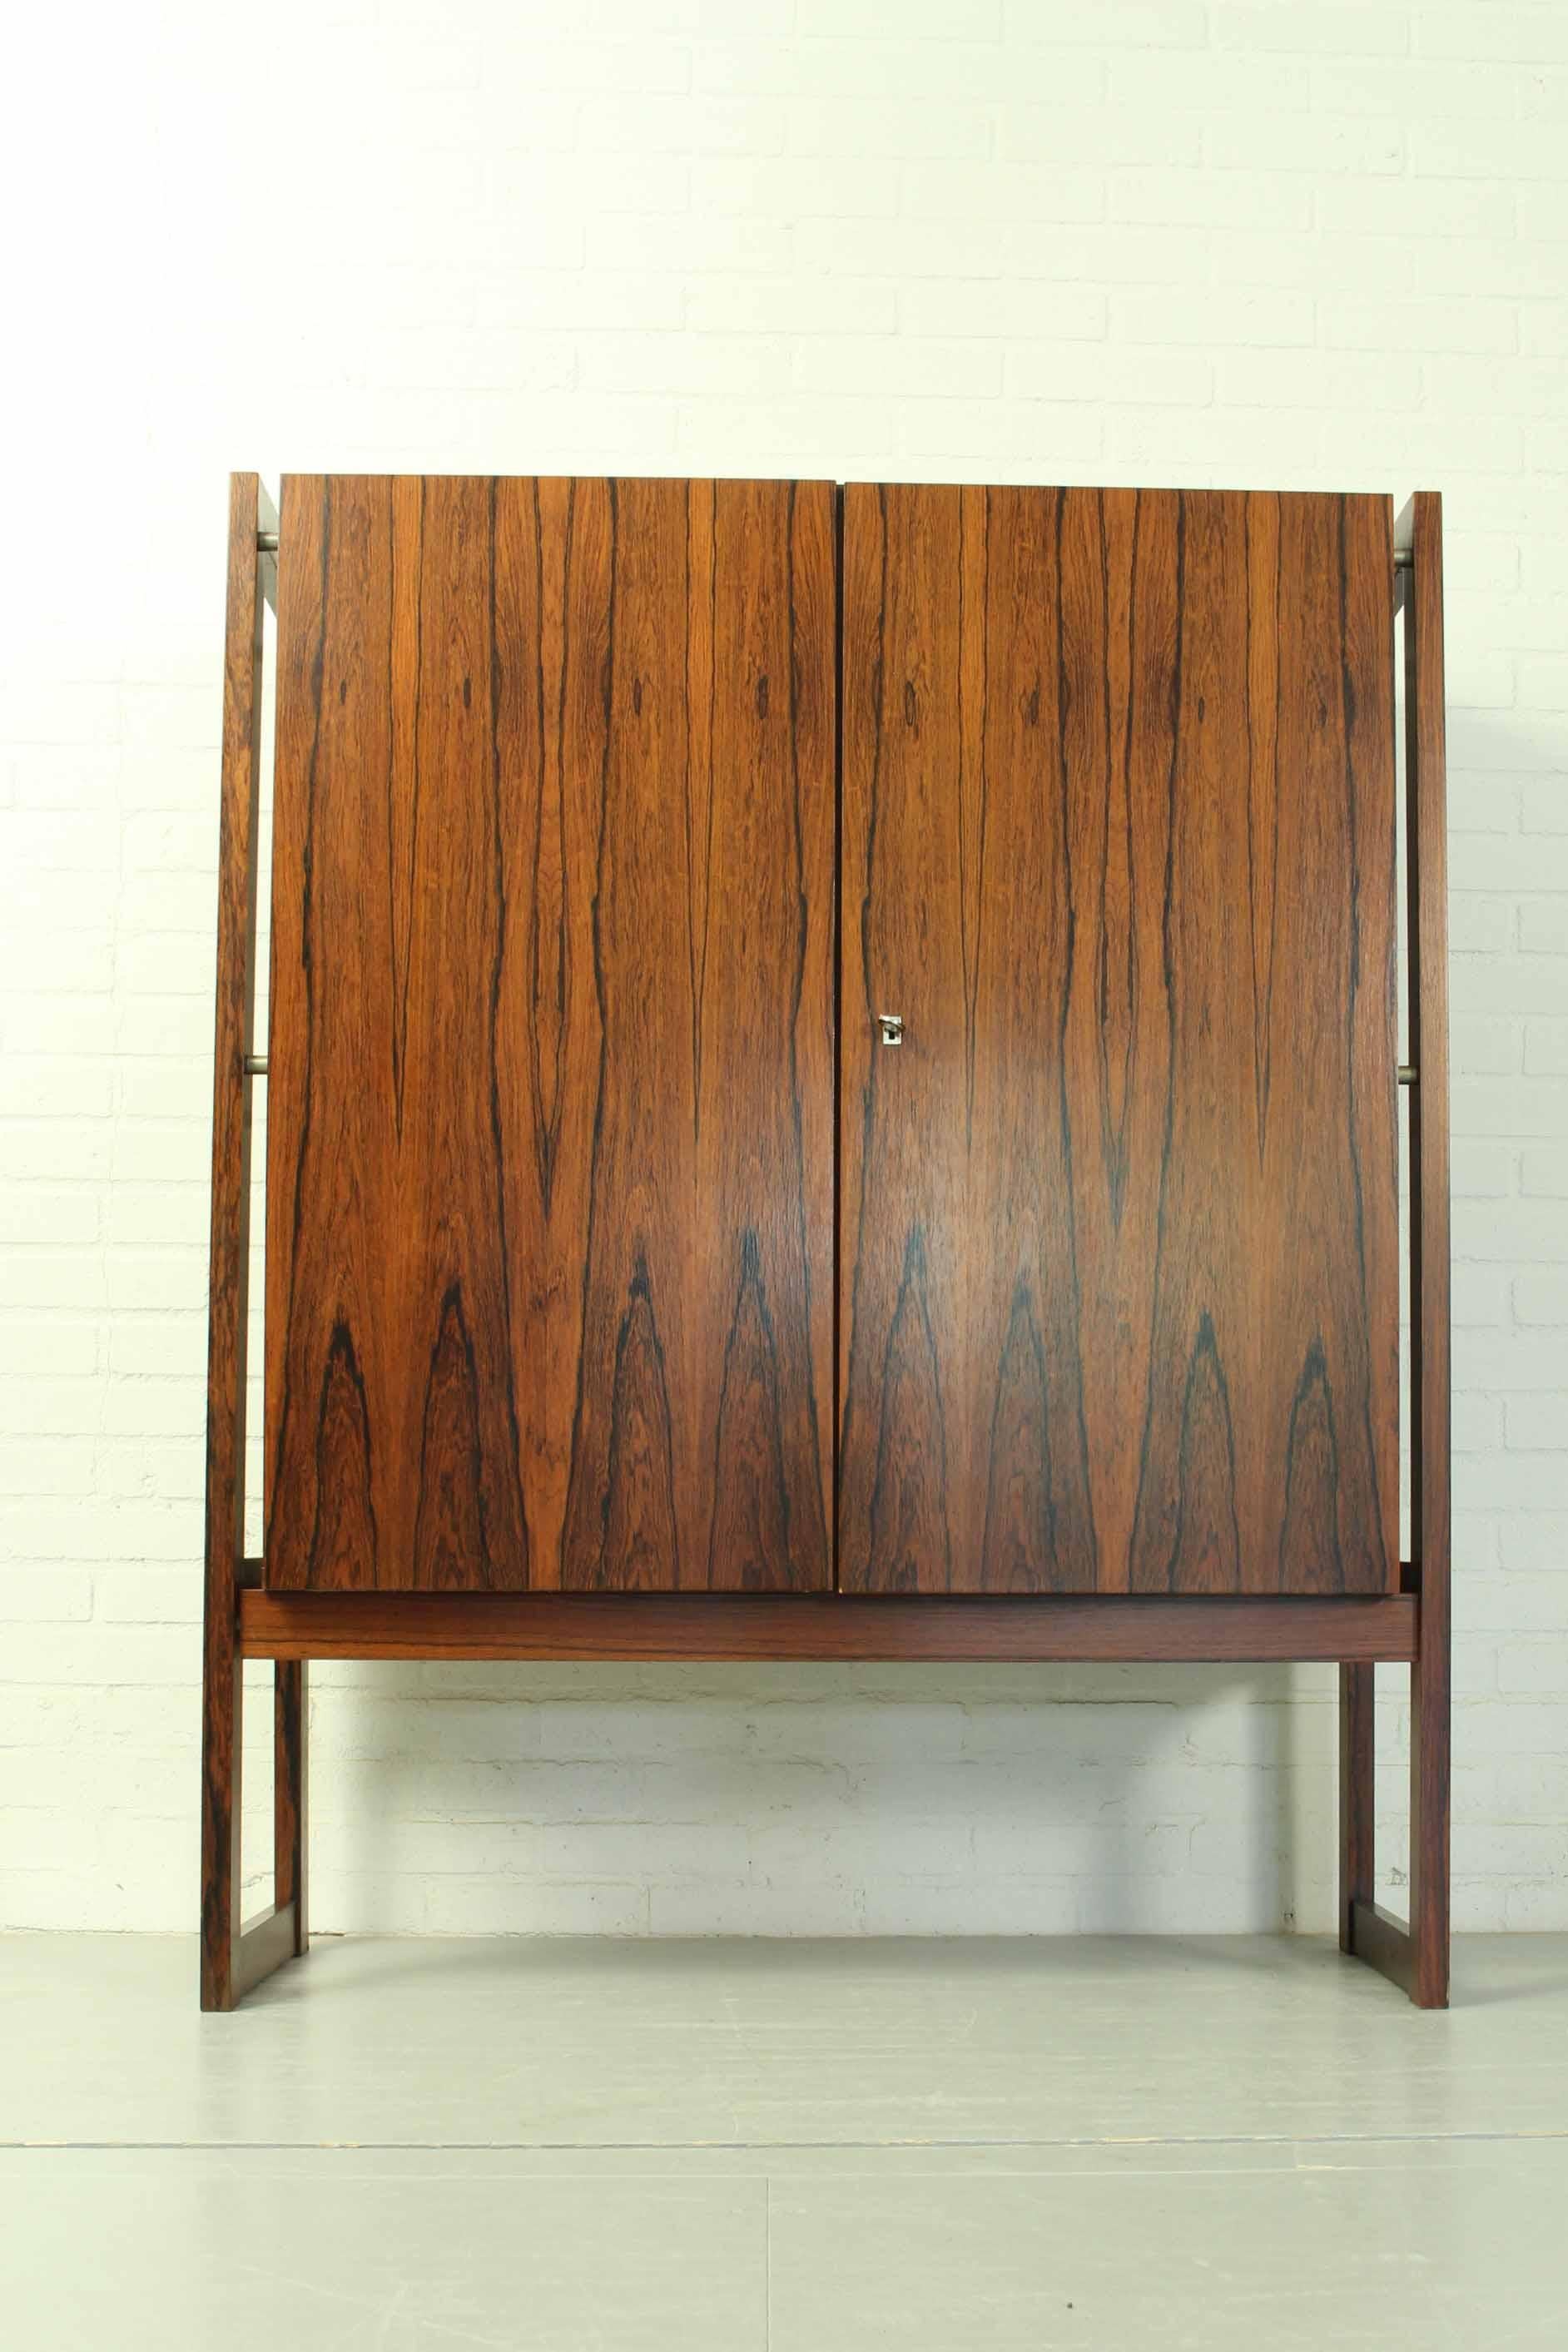 Rosewood Highboard “Malmo” within wood frame, executed in Rio Palissander. A very nice interior statement piece. Origination: Germany, late 1960s. 

Dimensions: 133cm h, 107cm w, 45cm d.
 